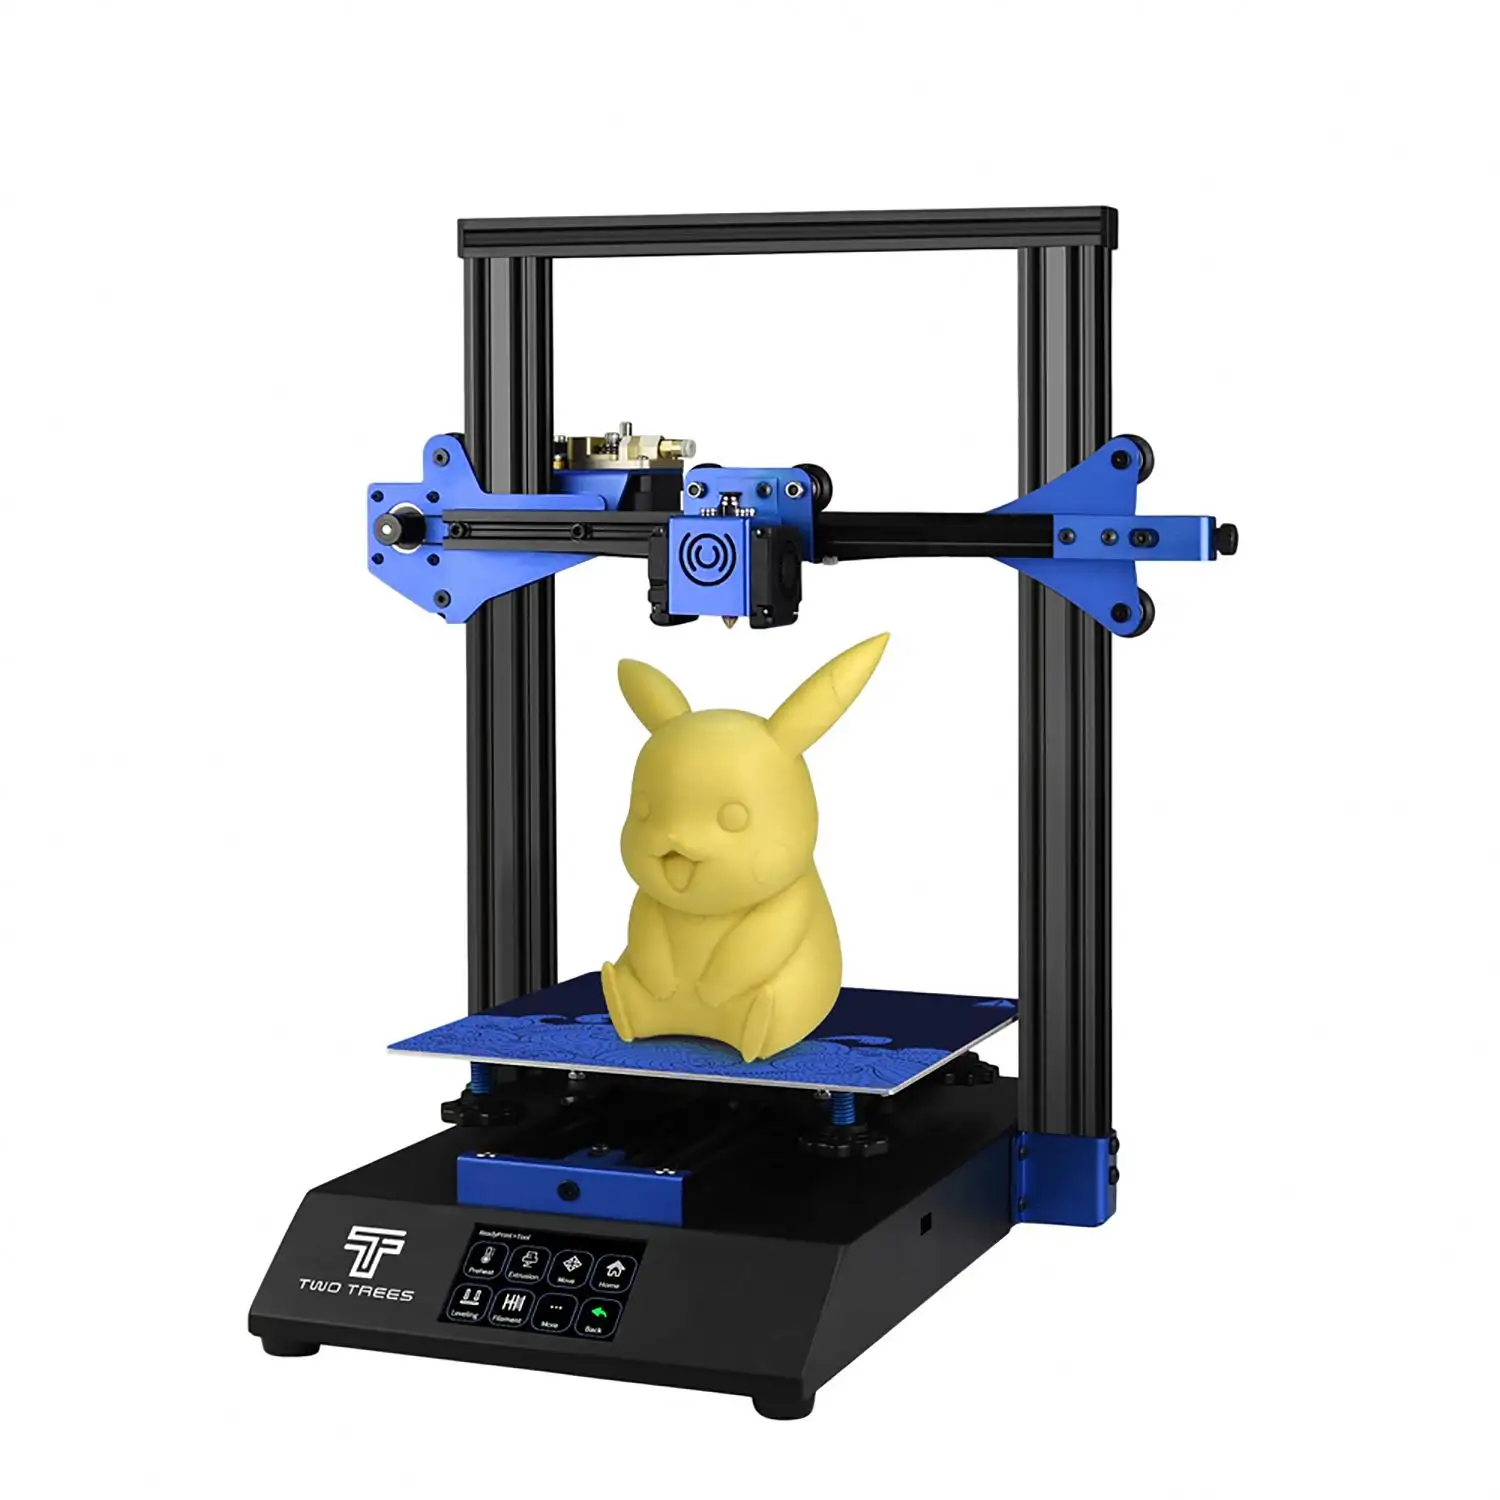 Hotels Prusa 3D Drucker Applicable Industries And Online Support After-sales Service Provided 3D Printer